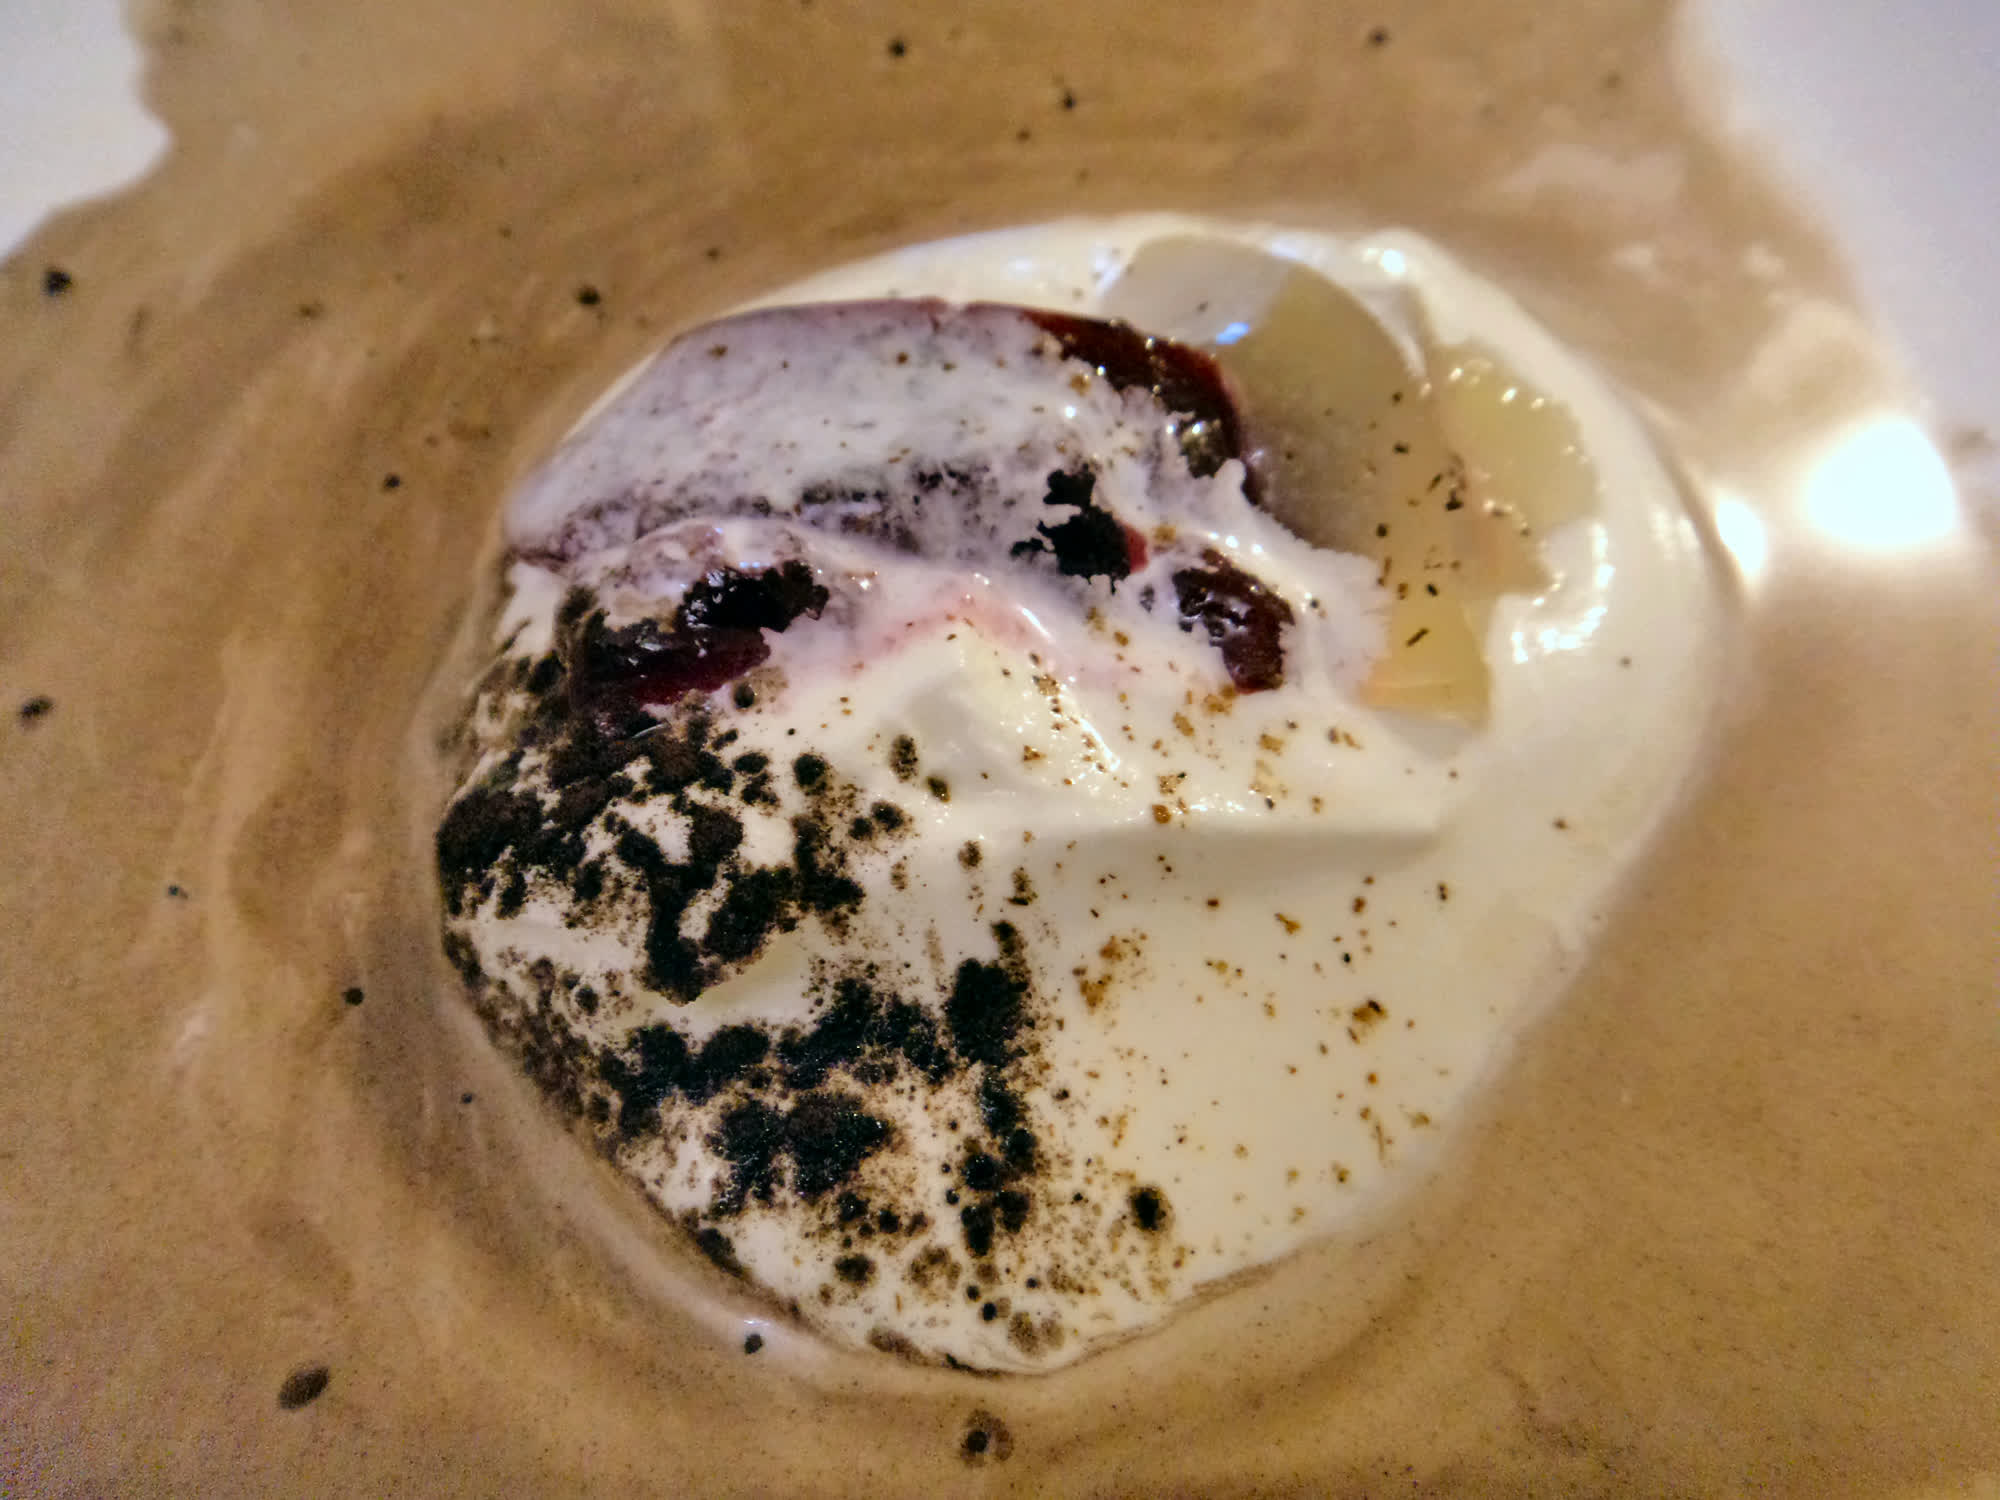  Wild grape jelly and lime jelly in whipped cream dusted with dark cocoa.